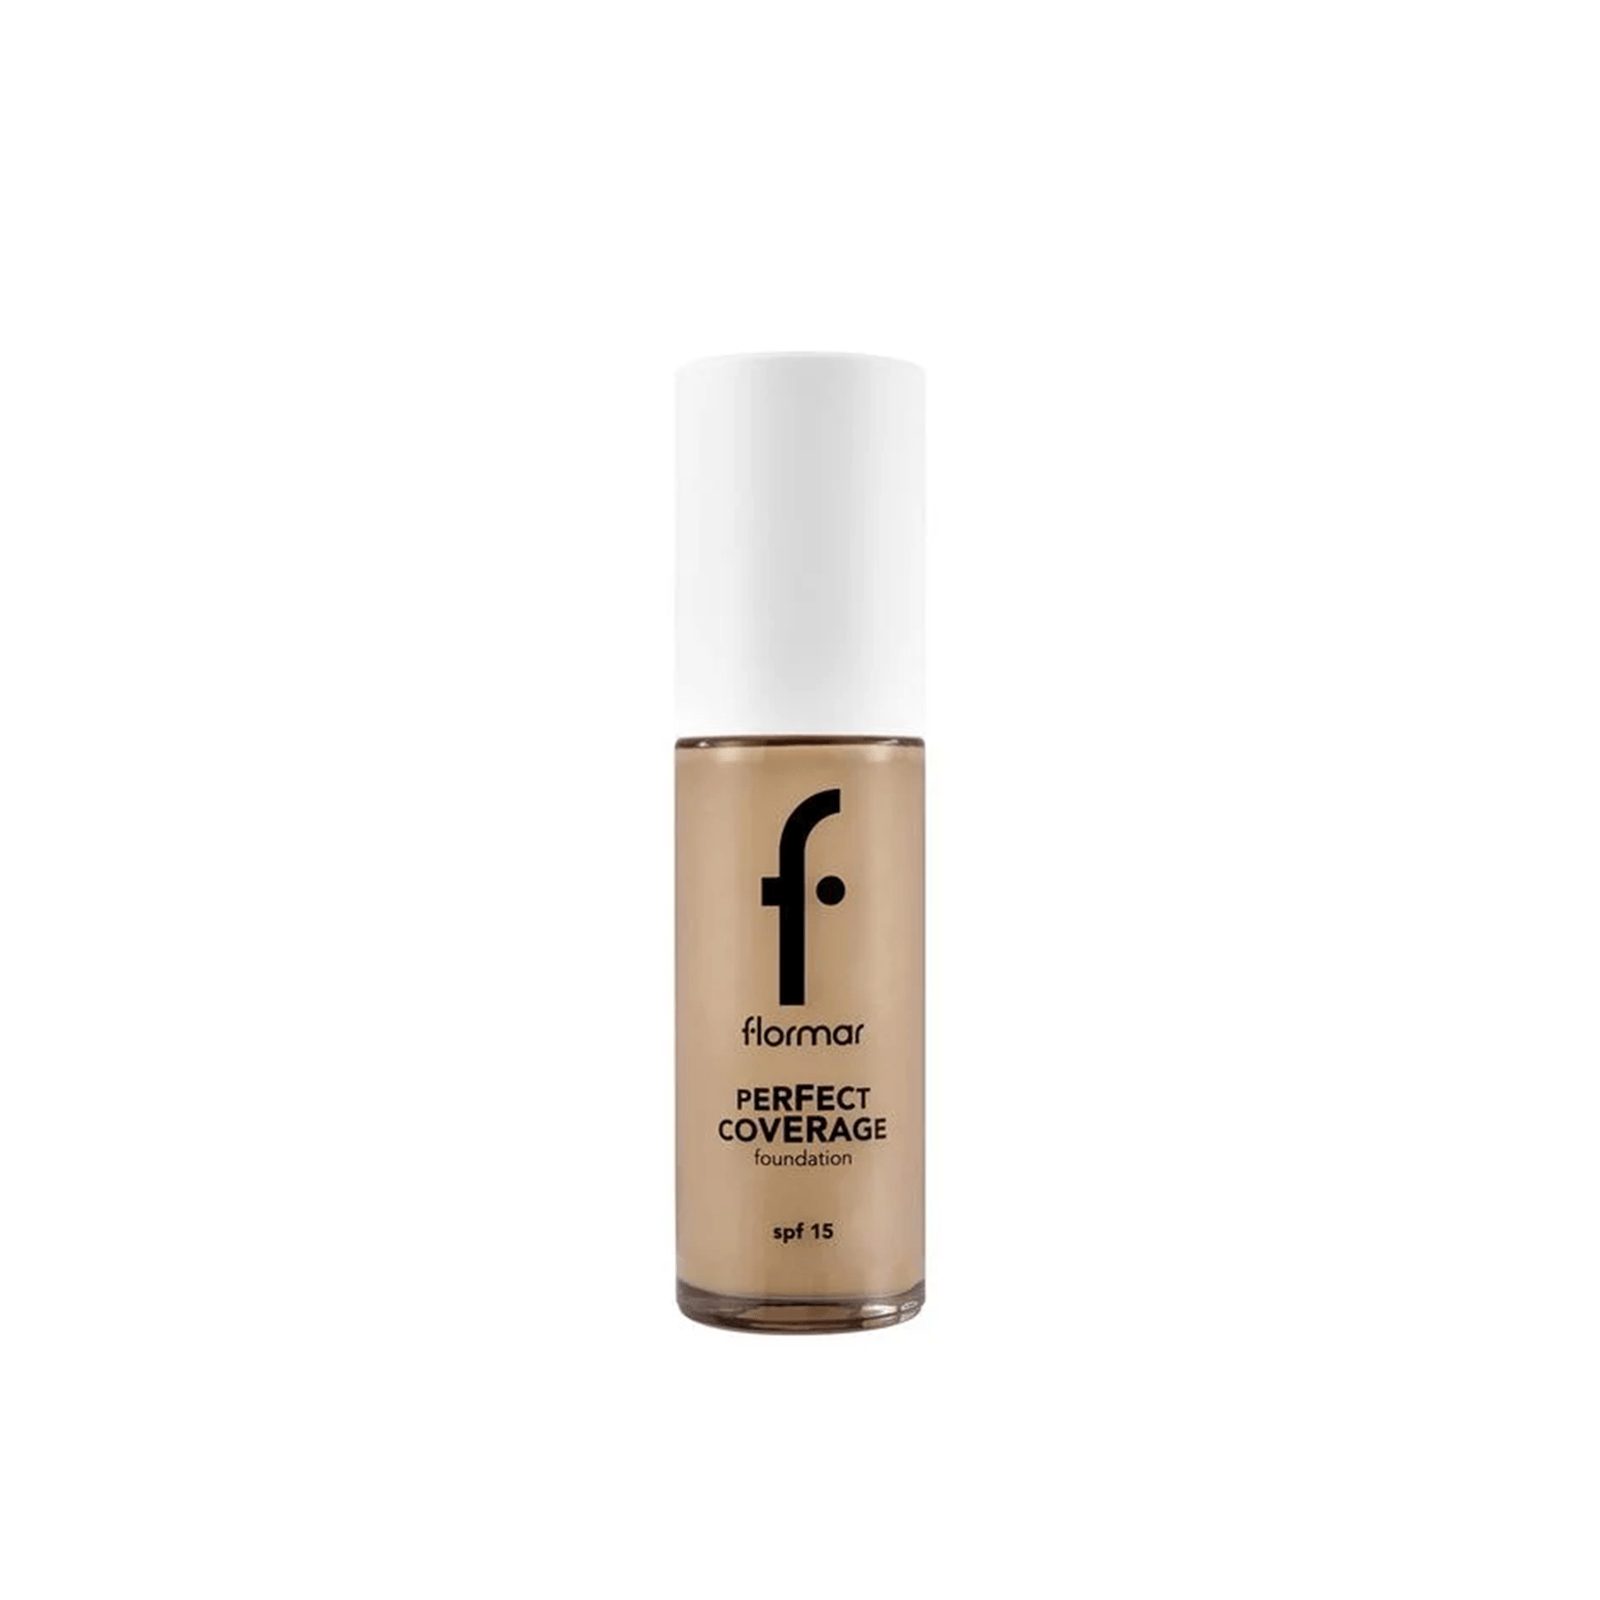 https://static.beautytocare.com/cdn-cgi/image/width=1600,height=1600,f=auto/media/catalog/product//f/l/flormar-perfect-coverage-foundation-spf15-108-honey-30ml_new_1.png